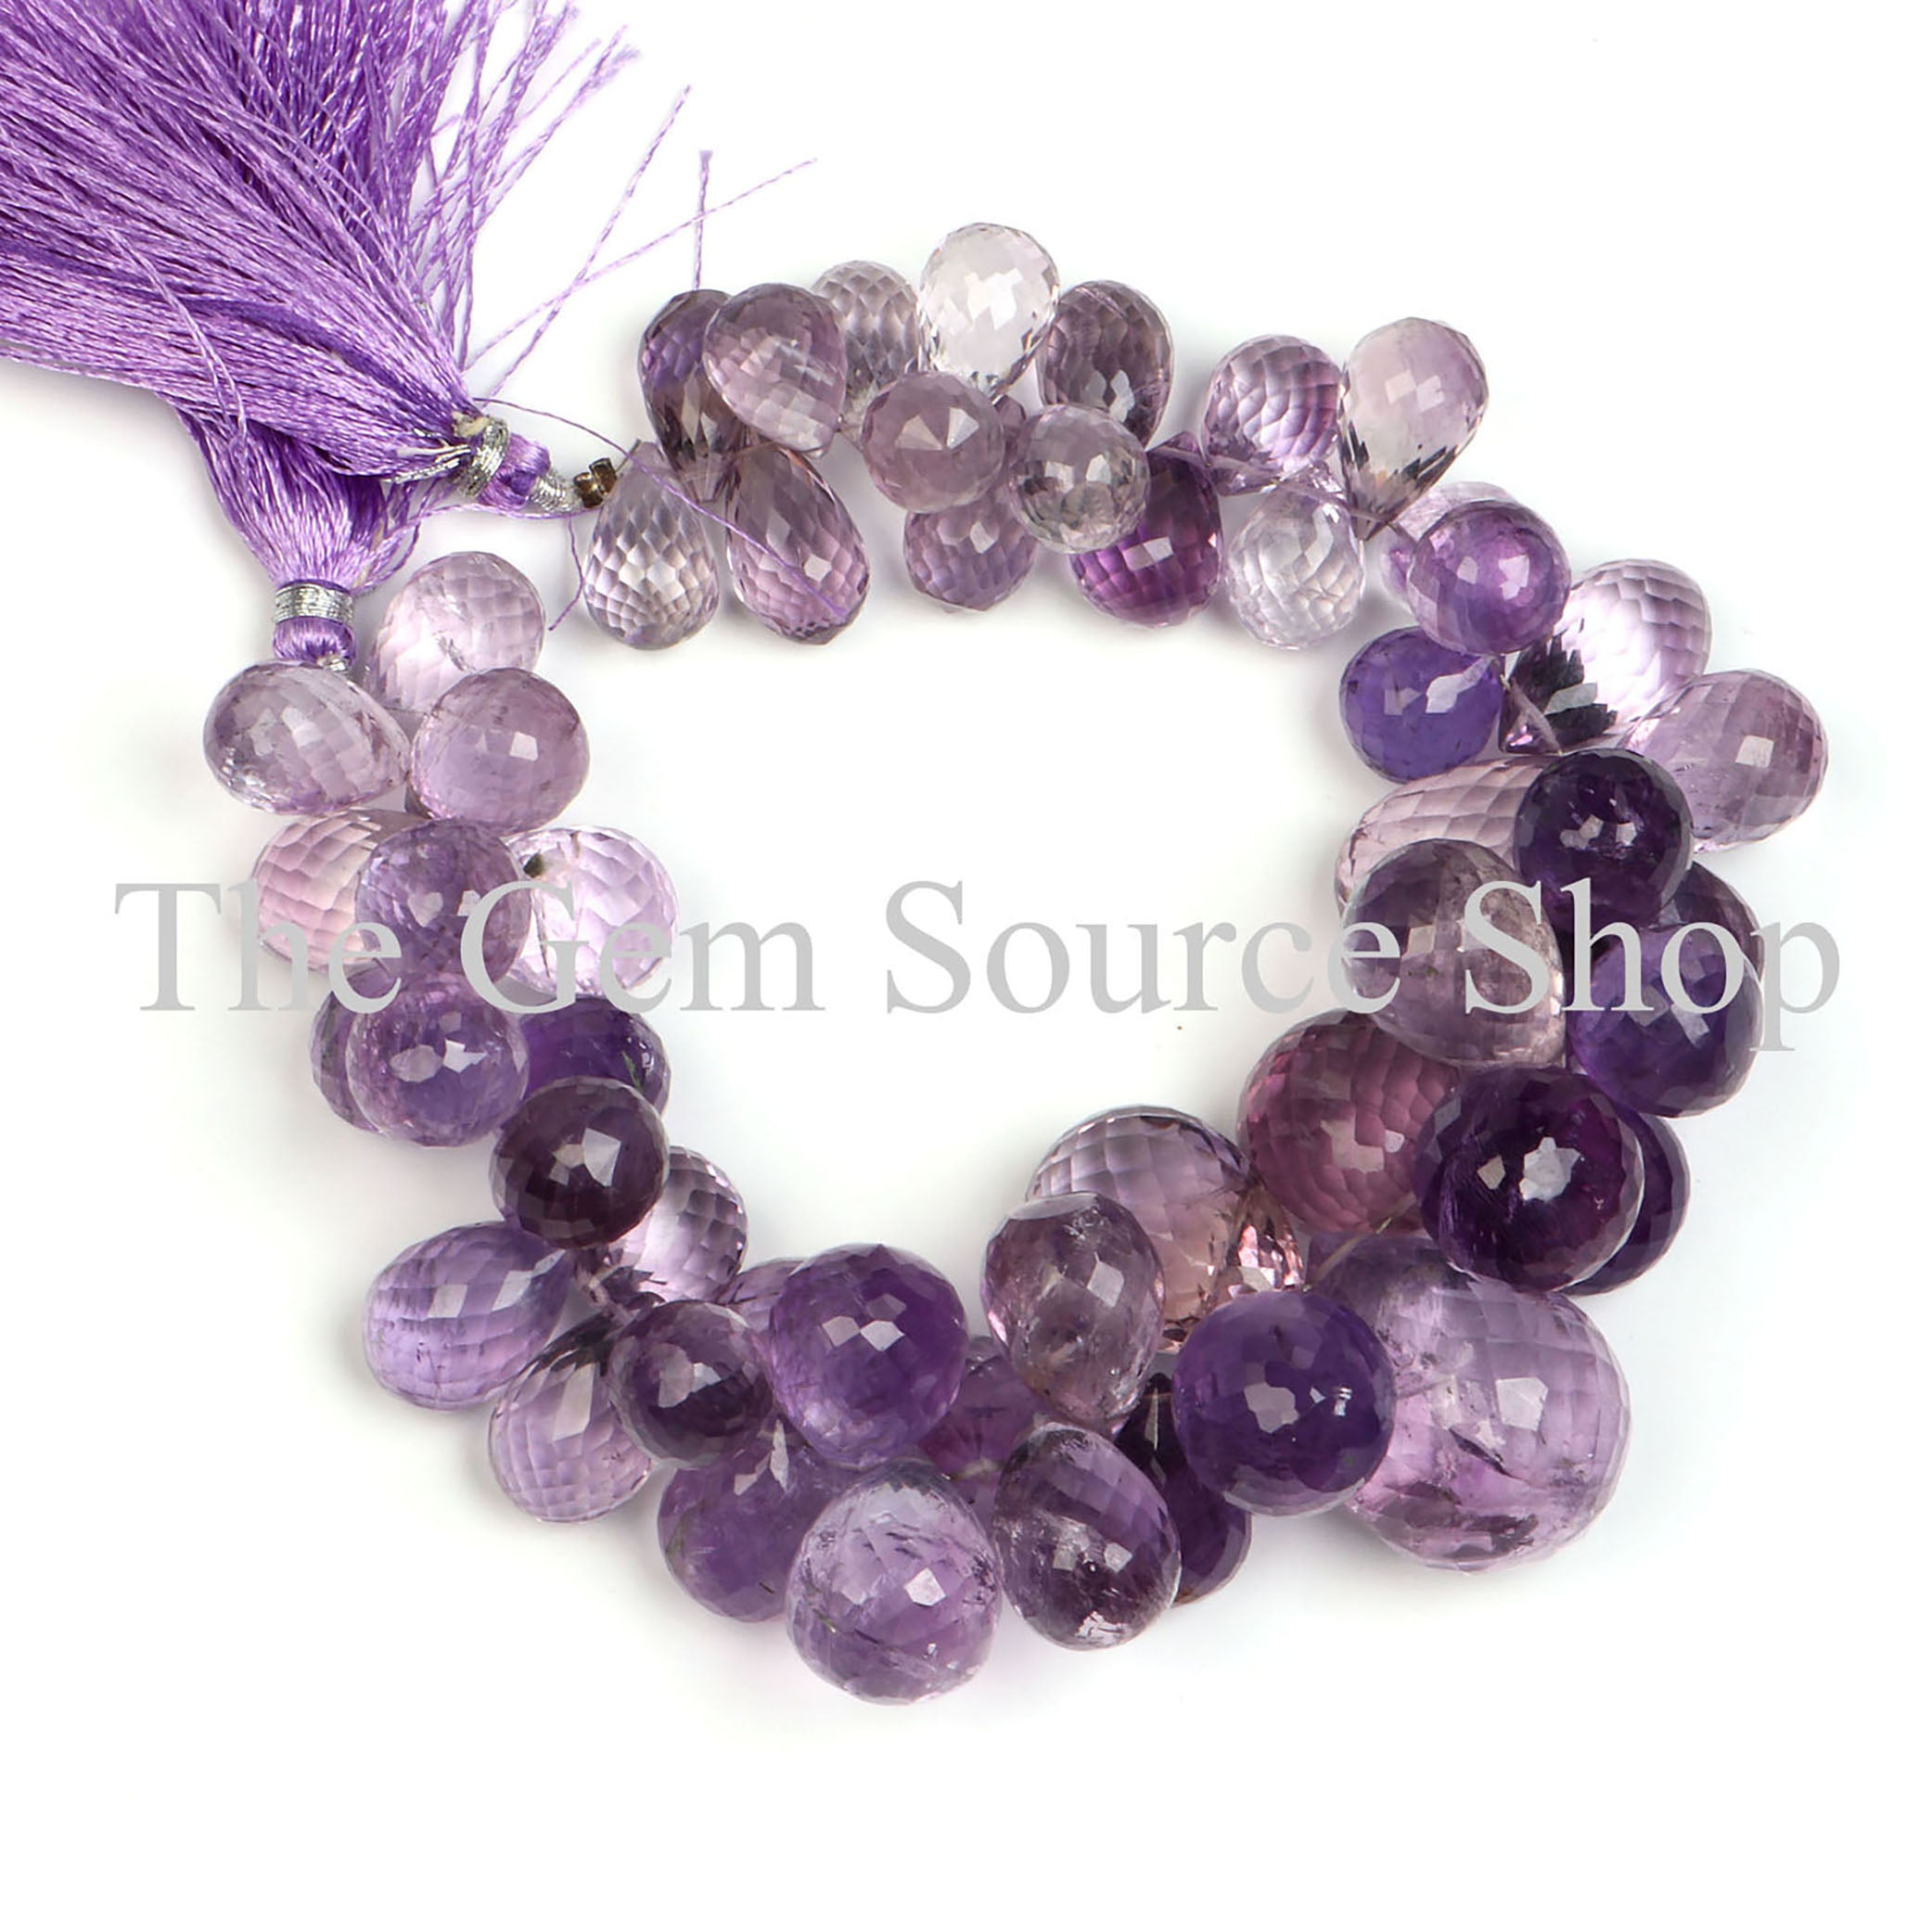 AAA Quality, Amethyst Beads, Amethyst Faceted Beads, Amethyst Drop Shape Beads, Gemstone Beads